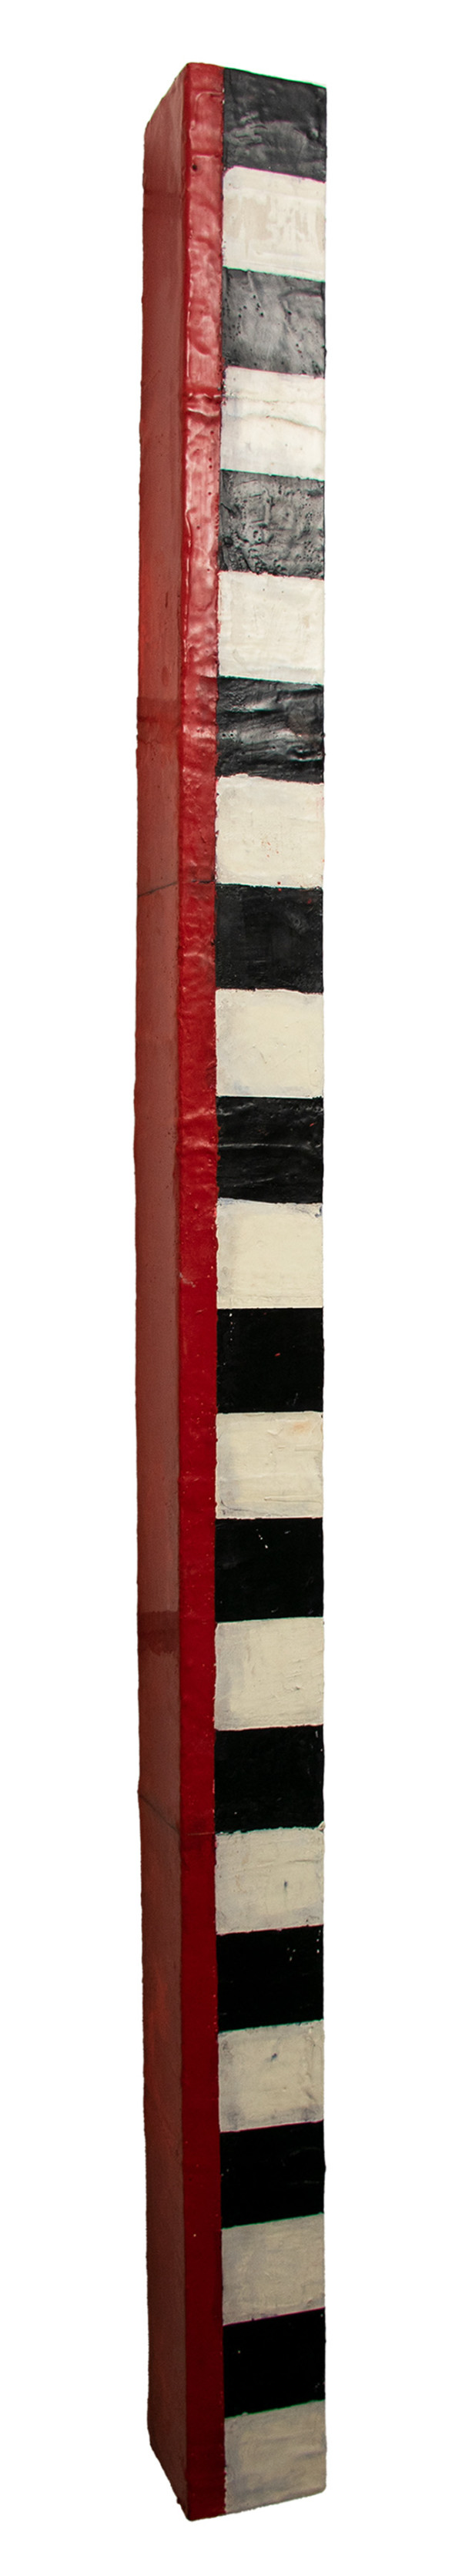 Wall Column-Black, white and red